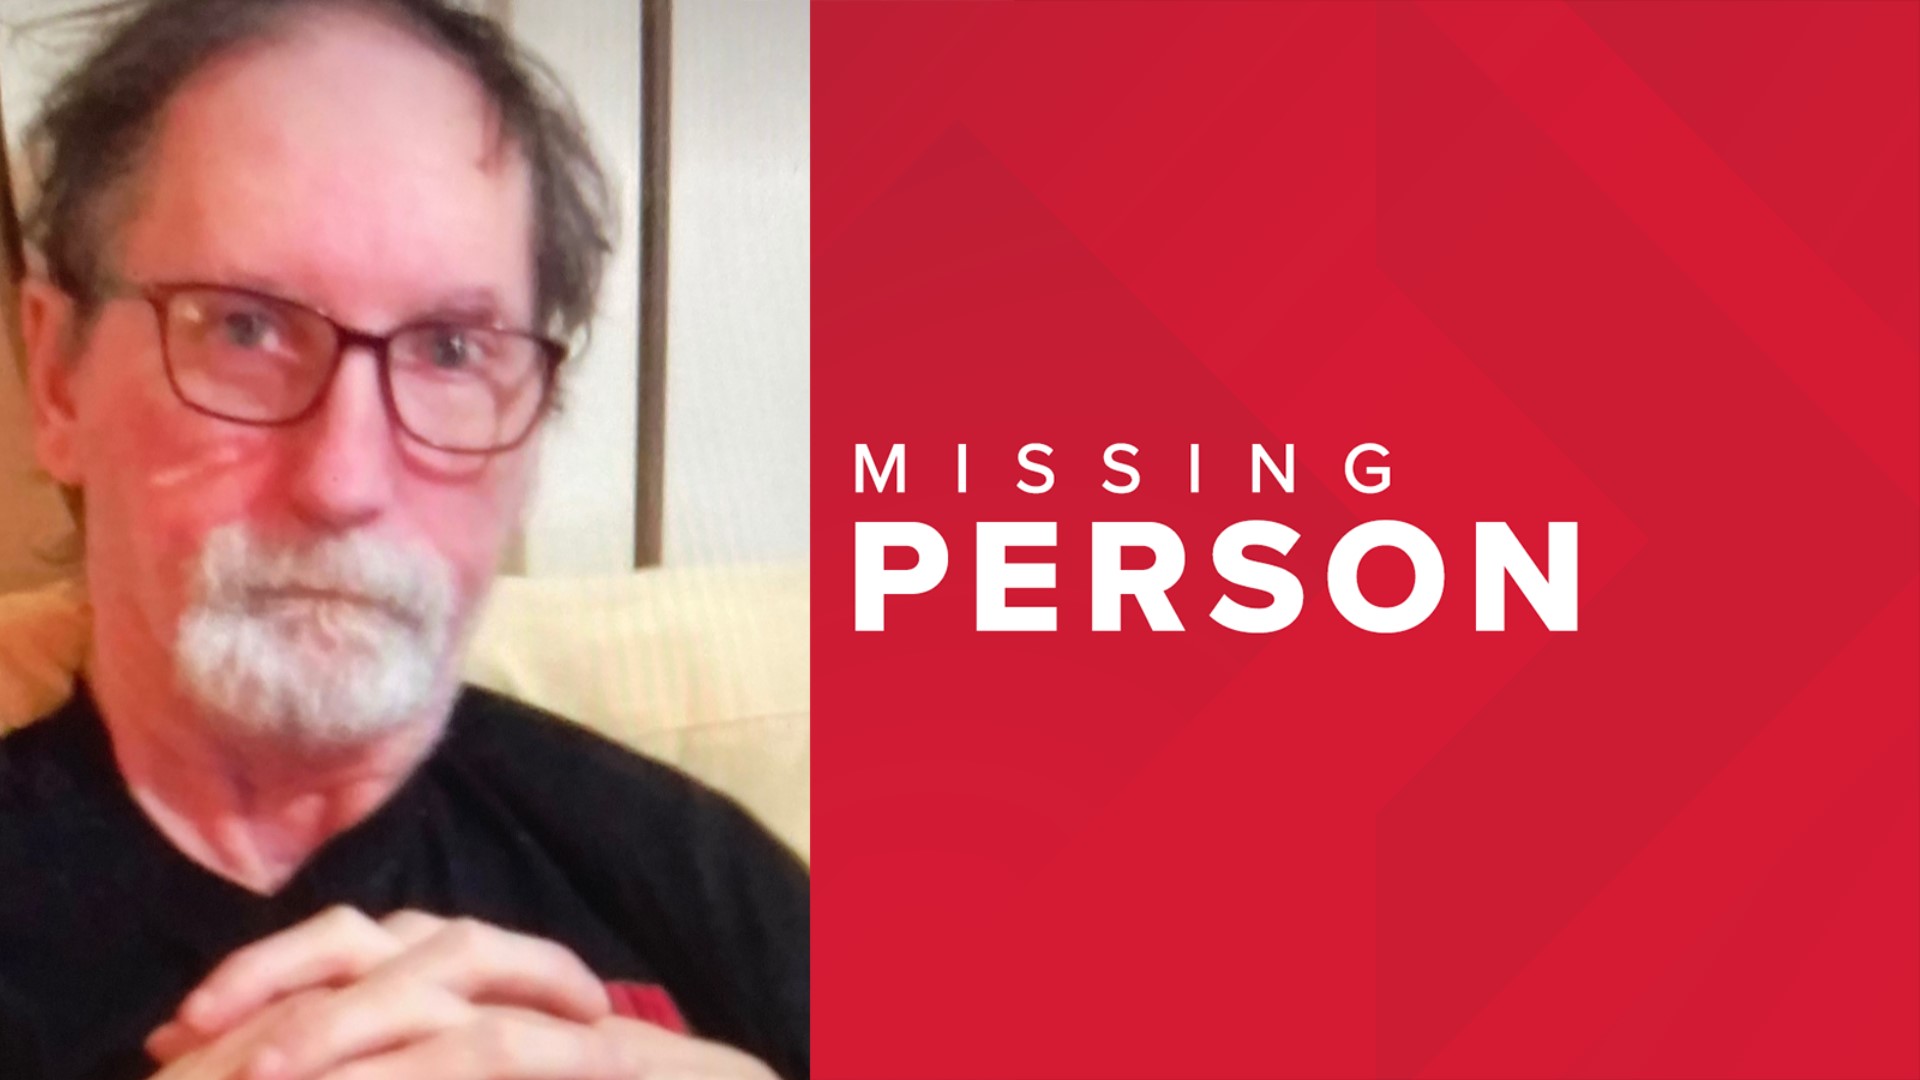 Police say William Brian Behrens walked away from his home north of the City of Allegan around 1:30 p.m. Sunday and has not been seen since.